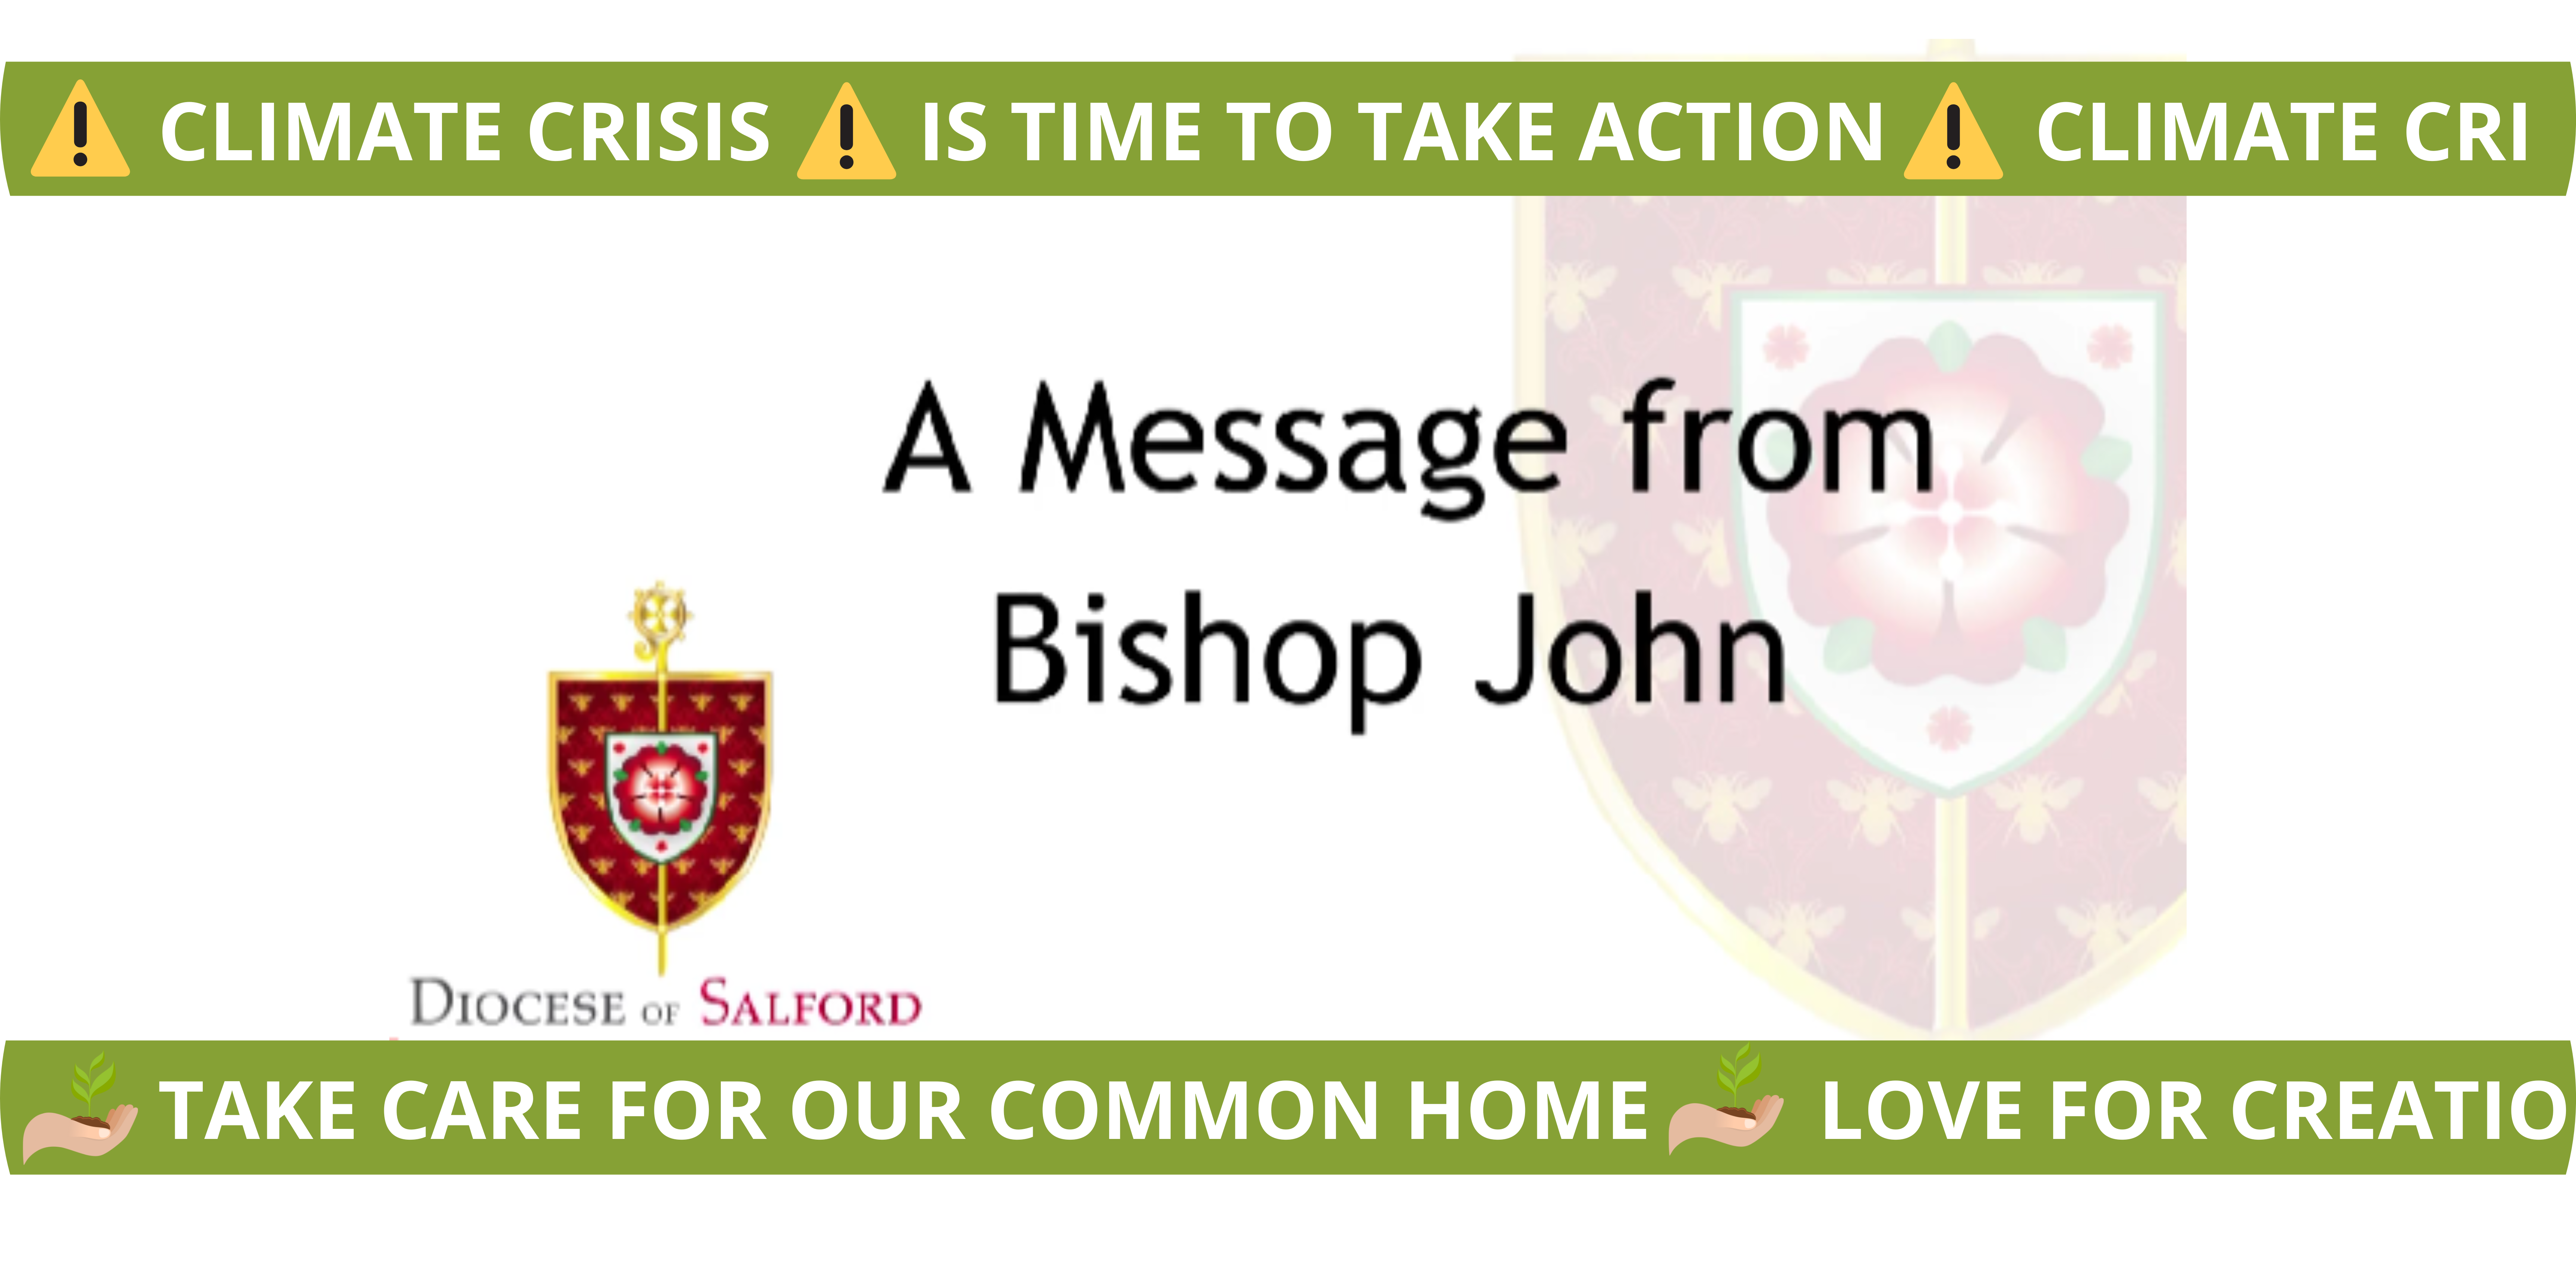 A message from Bishop John